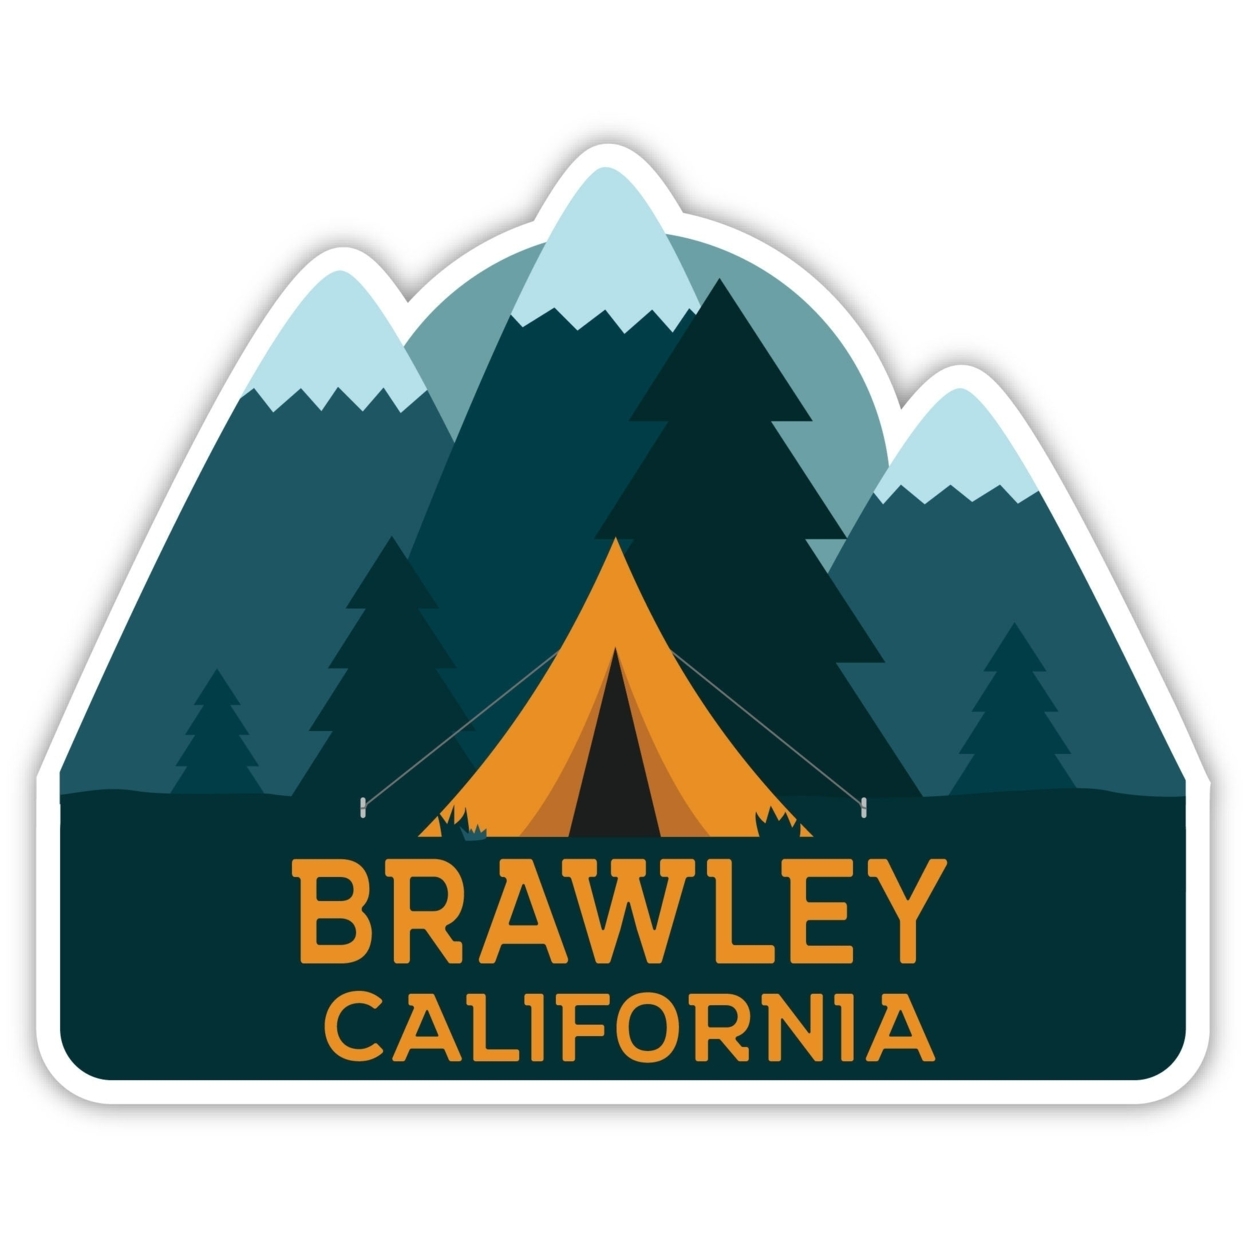 Brawley California Souvenir Decorative Stickers (Choose Theme And Size) - 4-Pack, 6-Inch, Tent